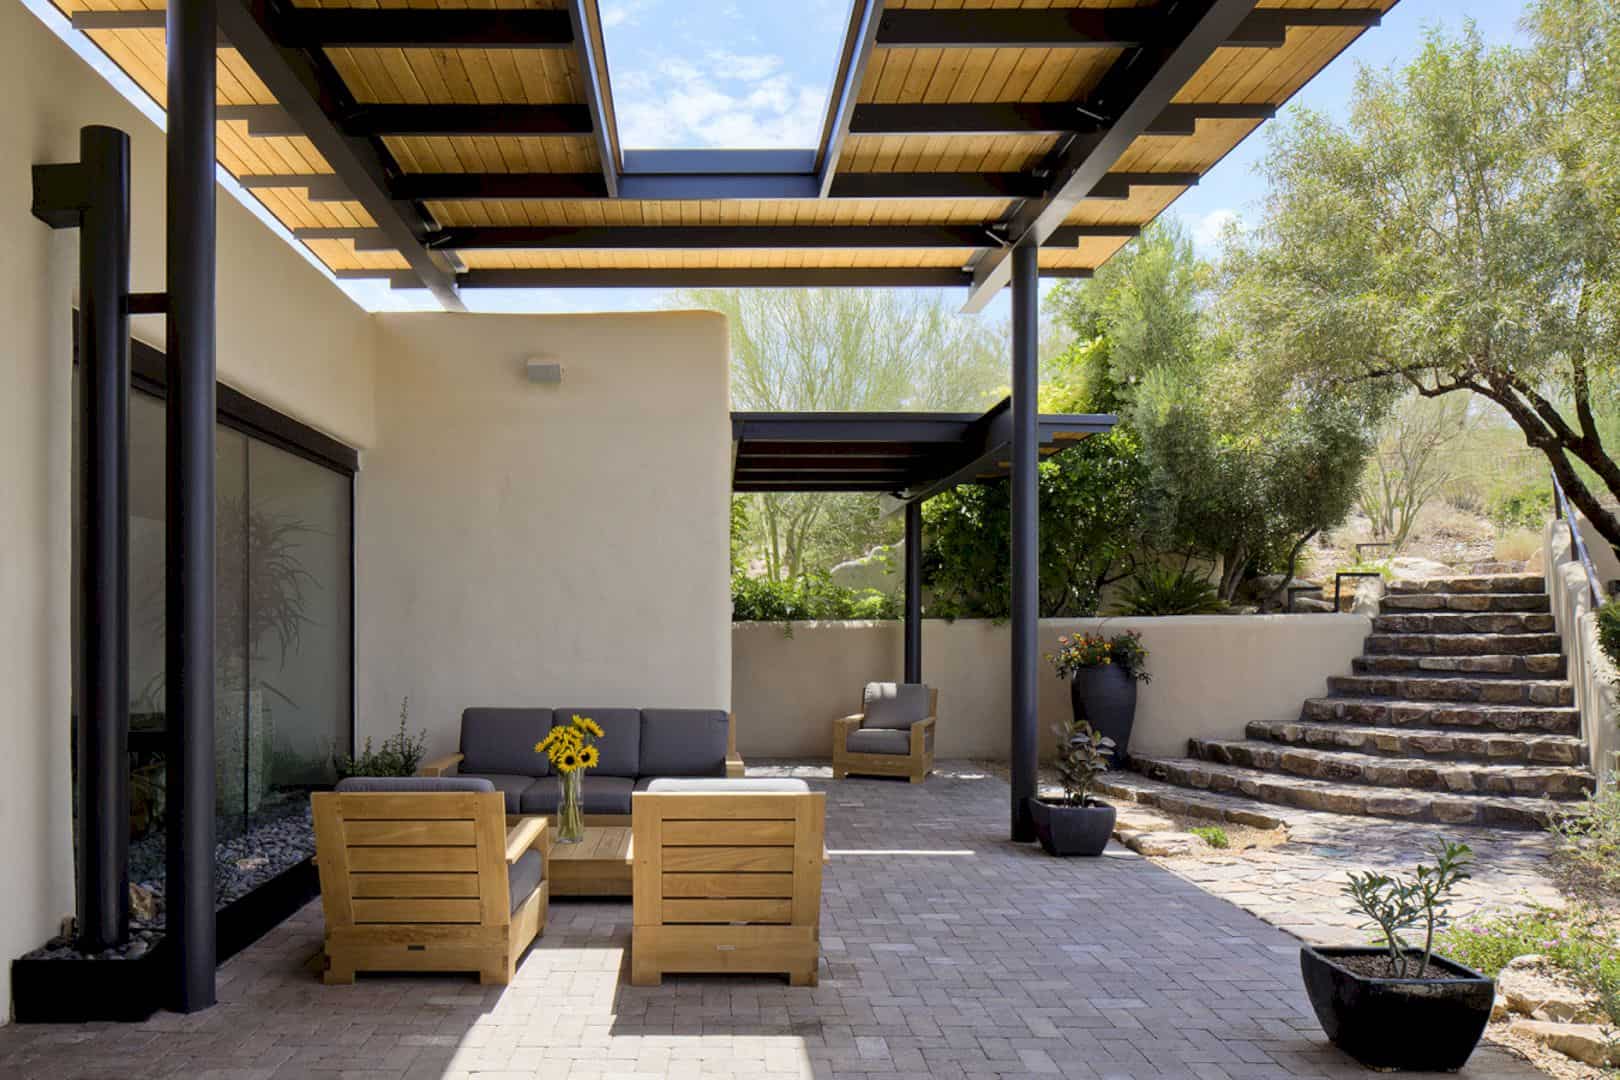 Canopy House Open Up Interior Spaces Embracing The Lush Landscape Of The Sonoran Desert 13